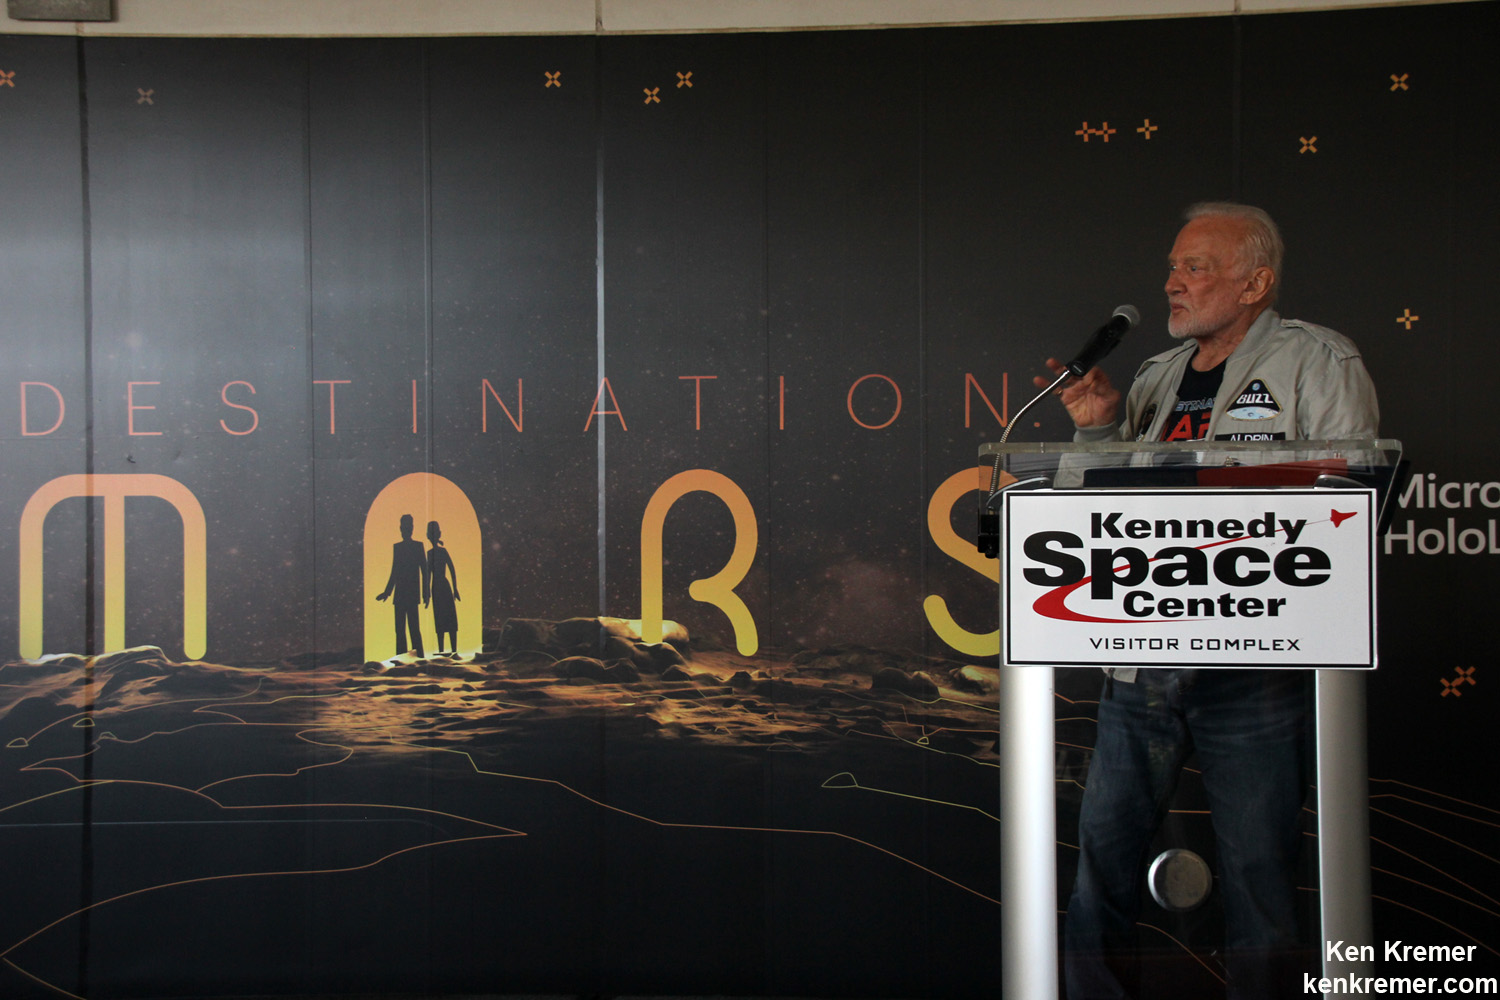 Apollo 11 moonwalker Buzz Aldrin describes newly opened ‘Destination Mars’ holographic experience during media preview at the Kennedy Space Center visitor complex in Florida on Sept. 18, 2016.  Credit: Ken Kremer/kenkremer.com